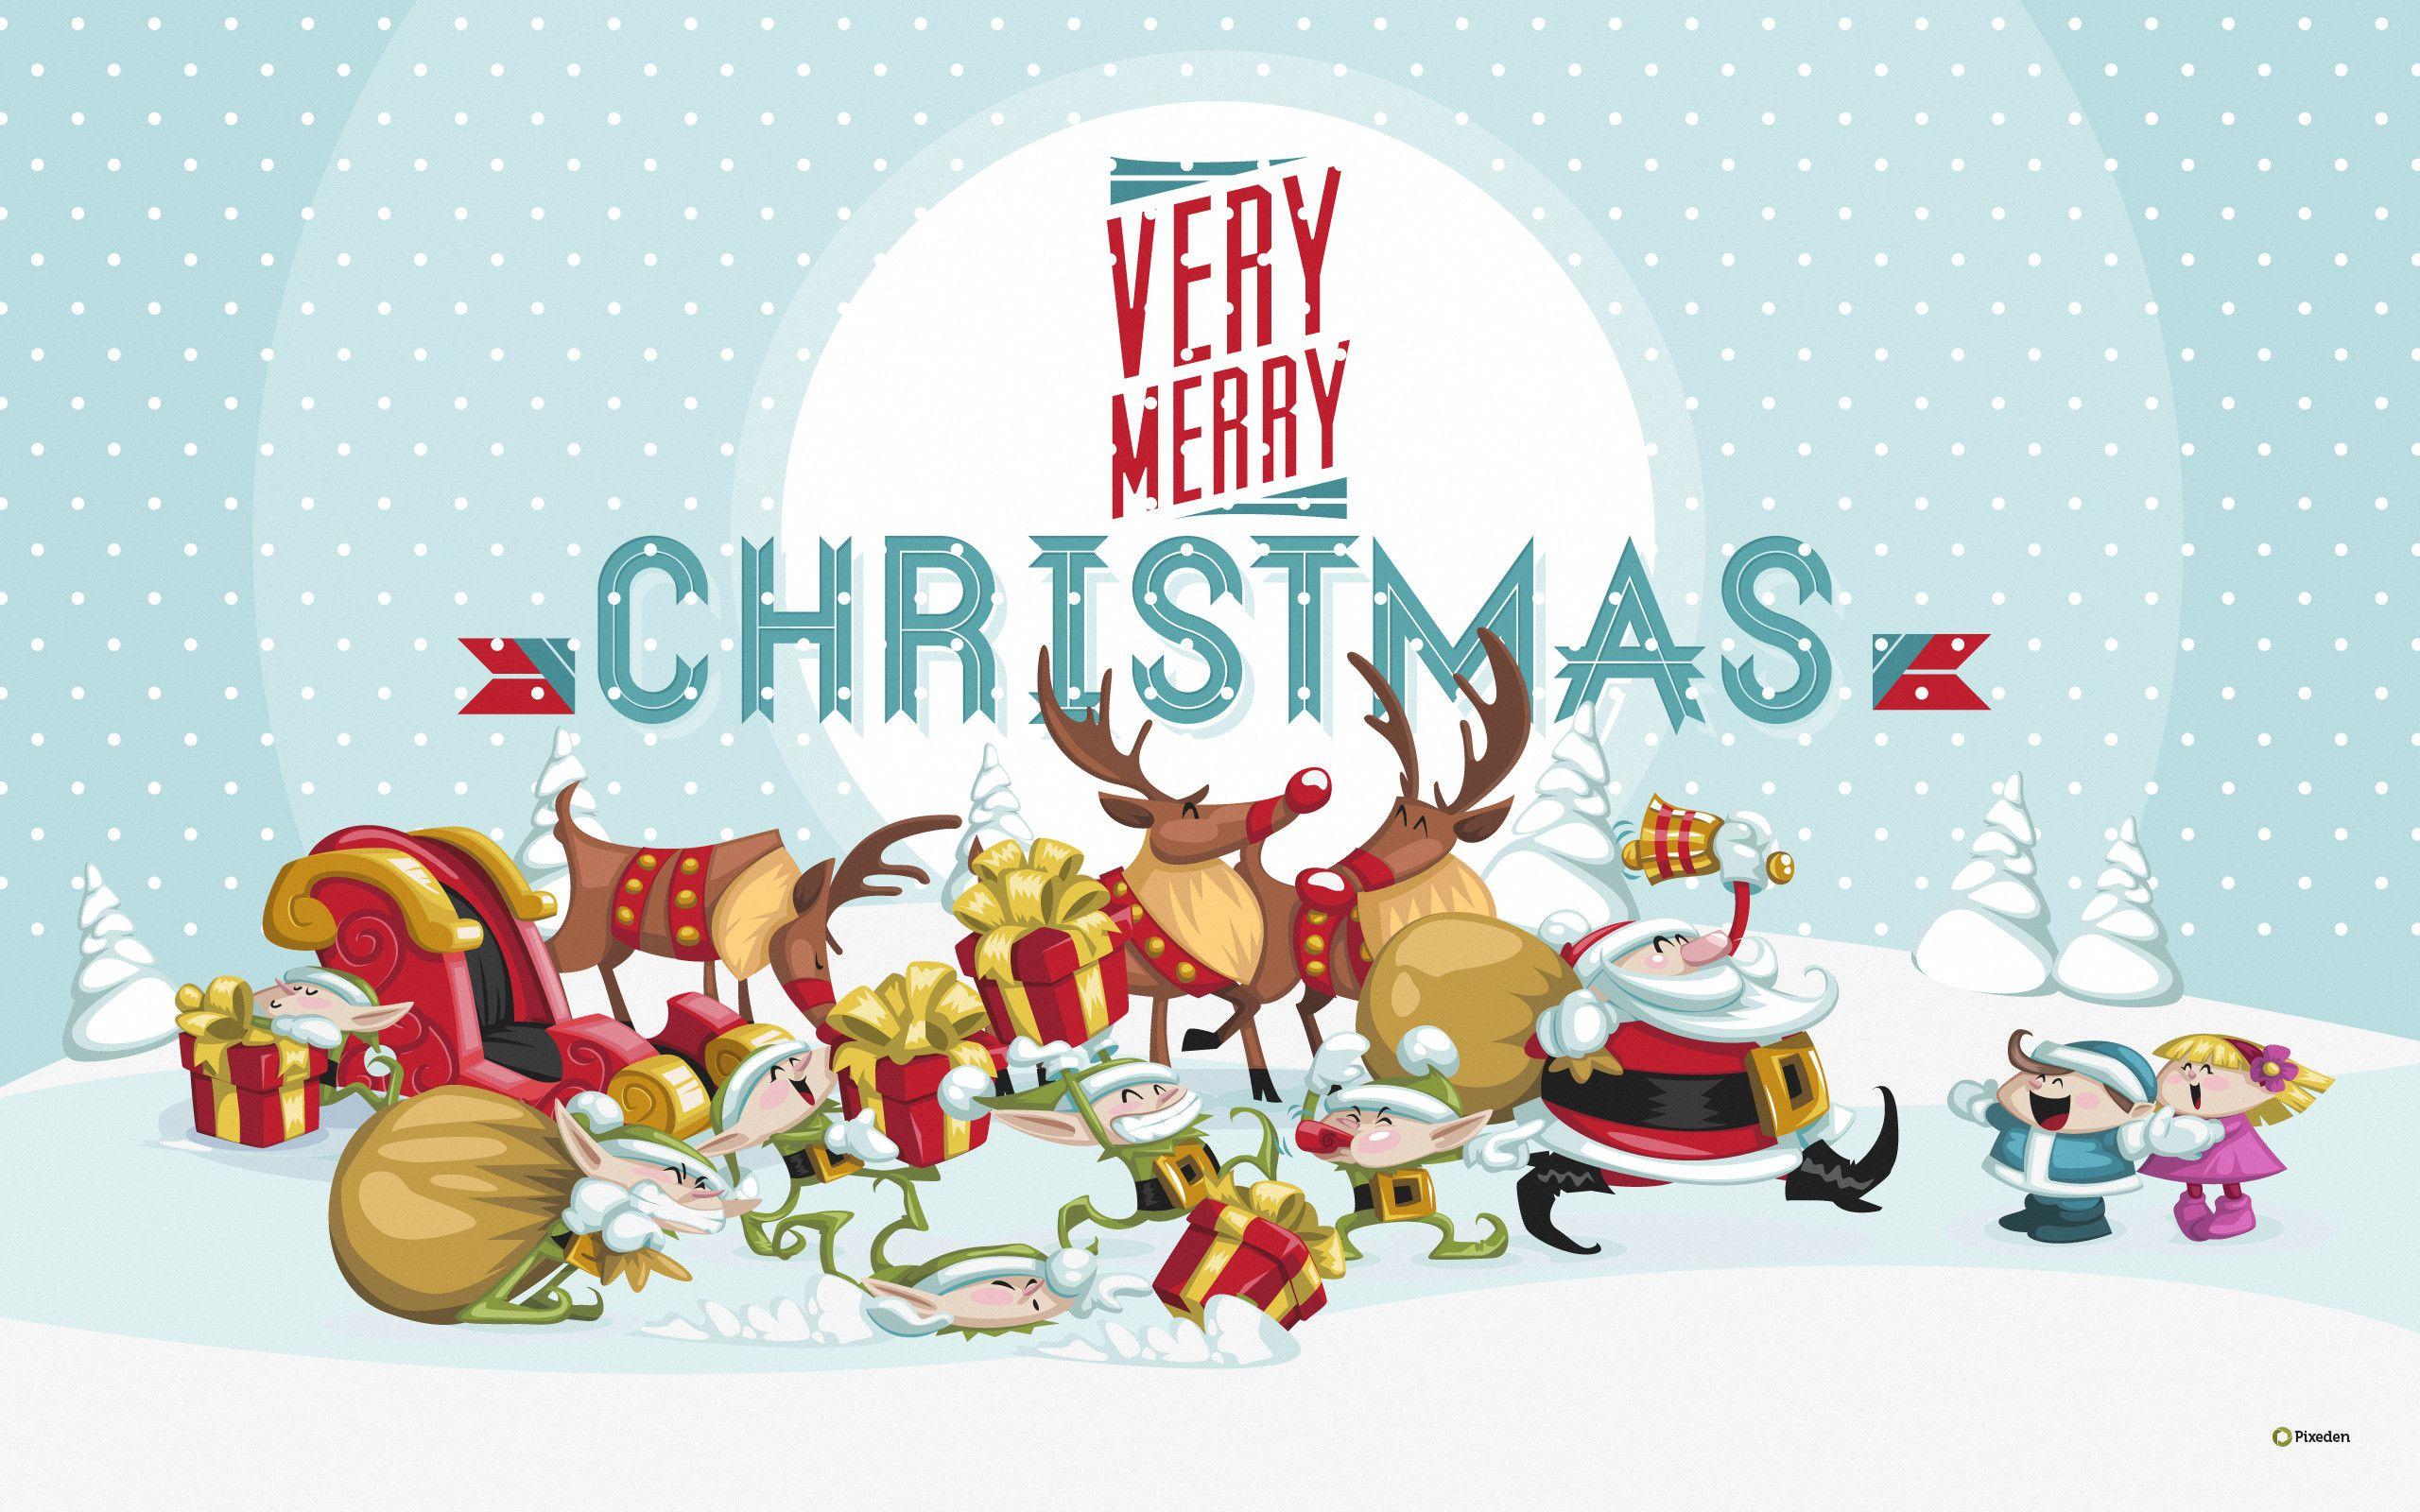 Merry Christmas Wallpaper 2018 background picture